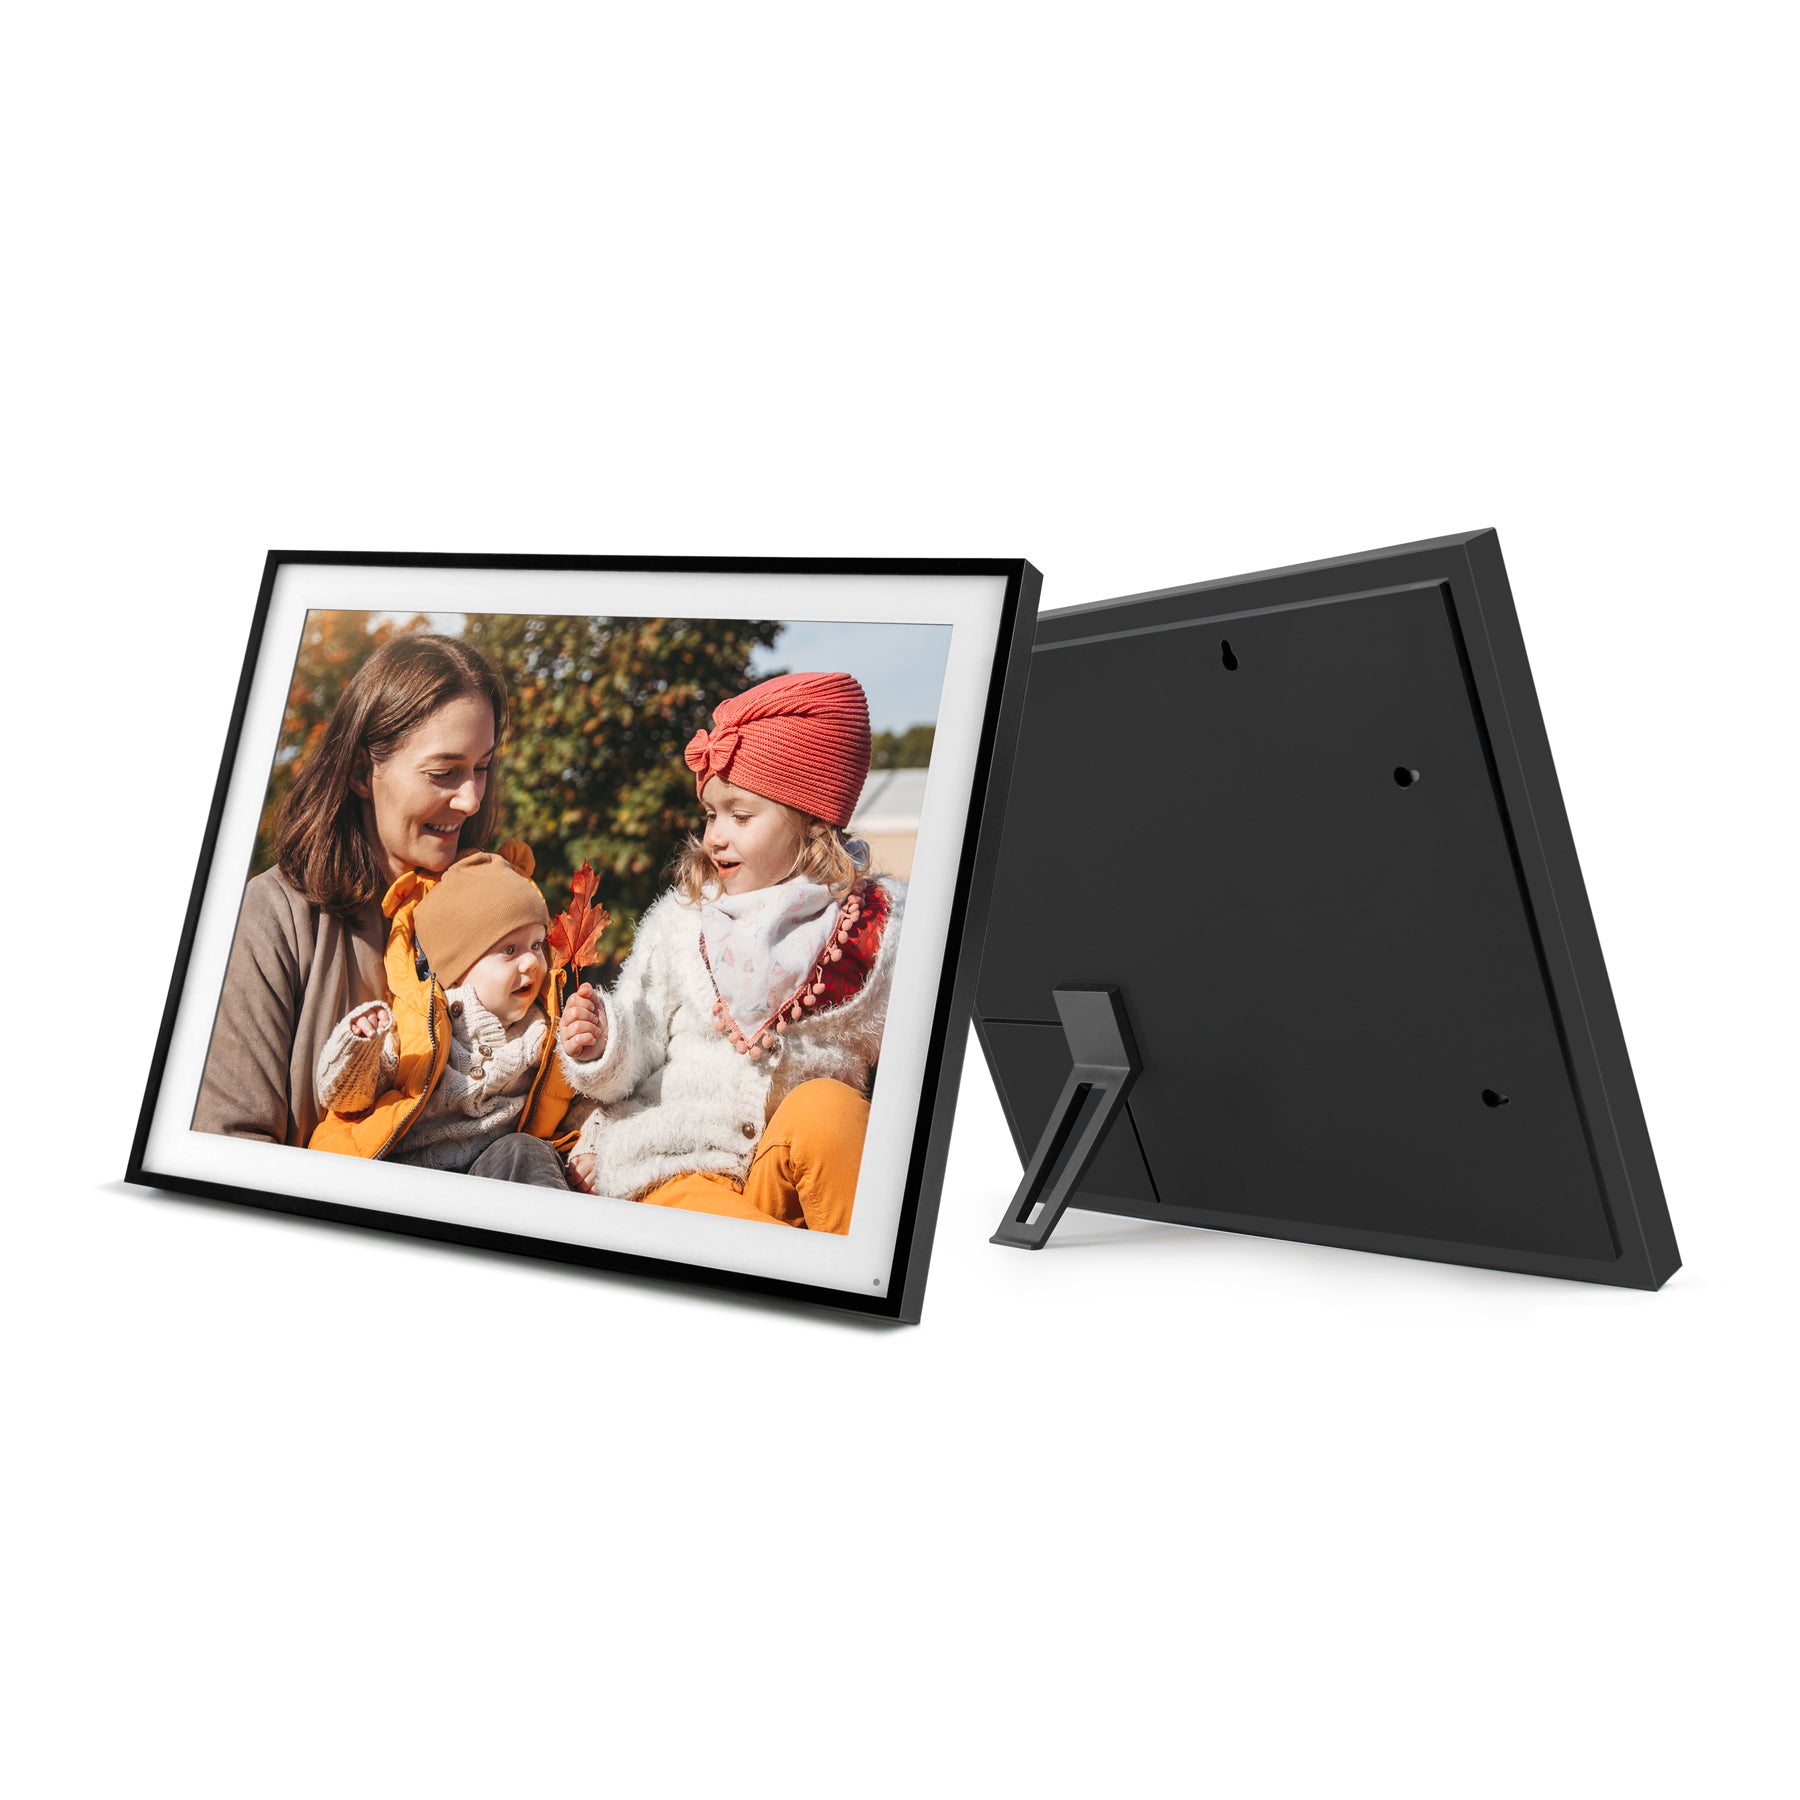 LAMU Portable Photo Organizer 2TB Sky Blue for Windows. All your photo –  Life and Memories Unlimited